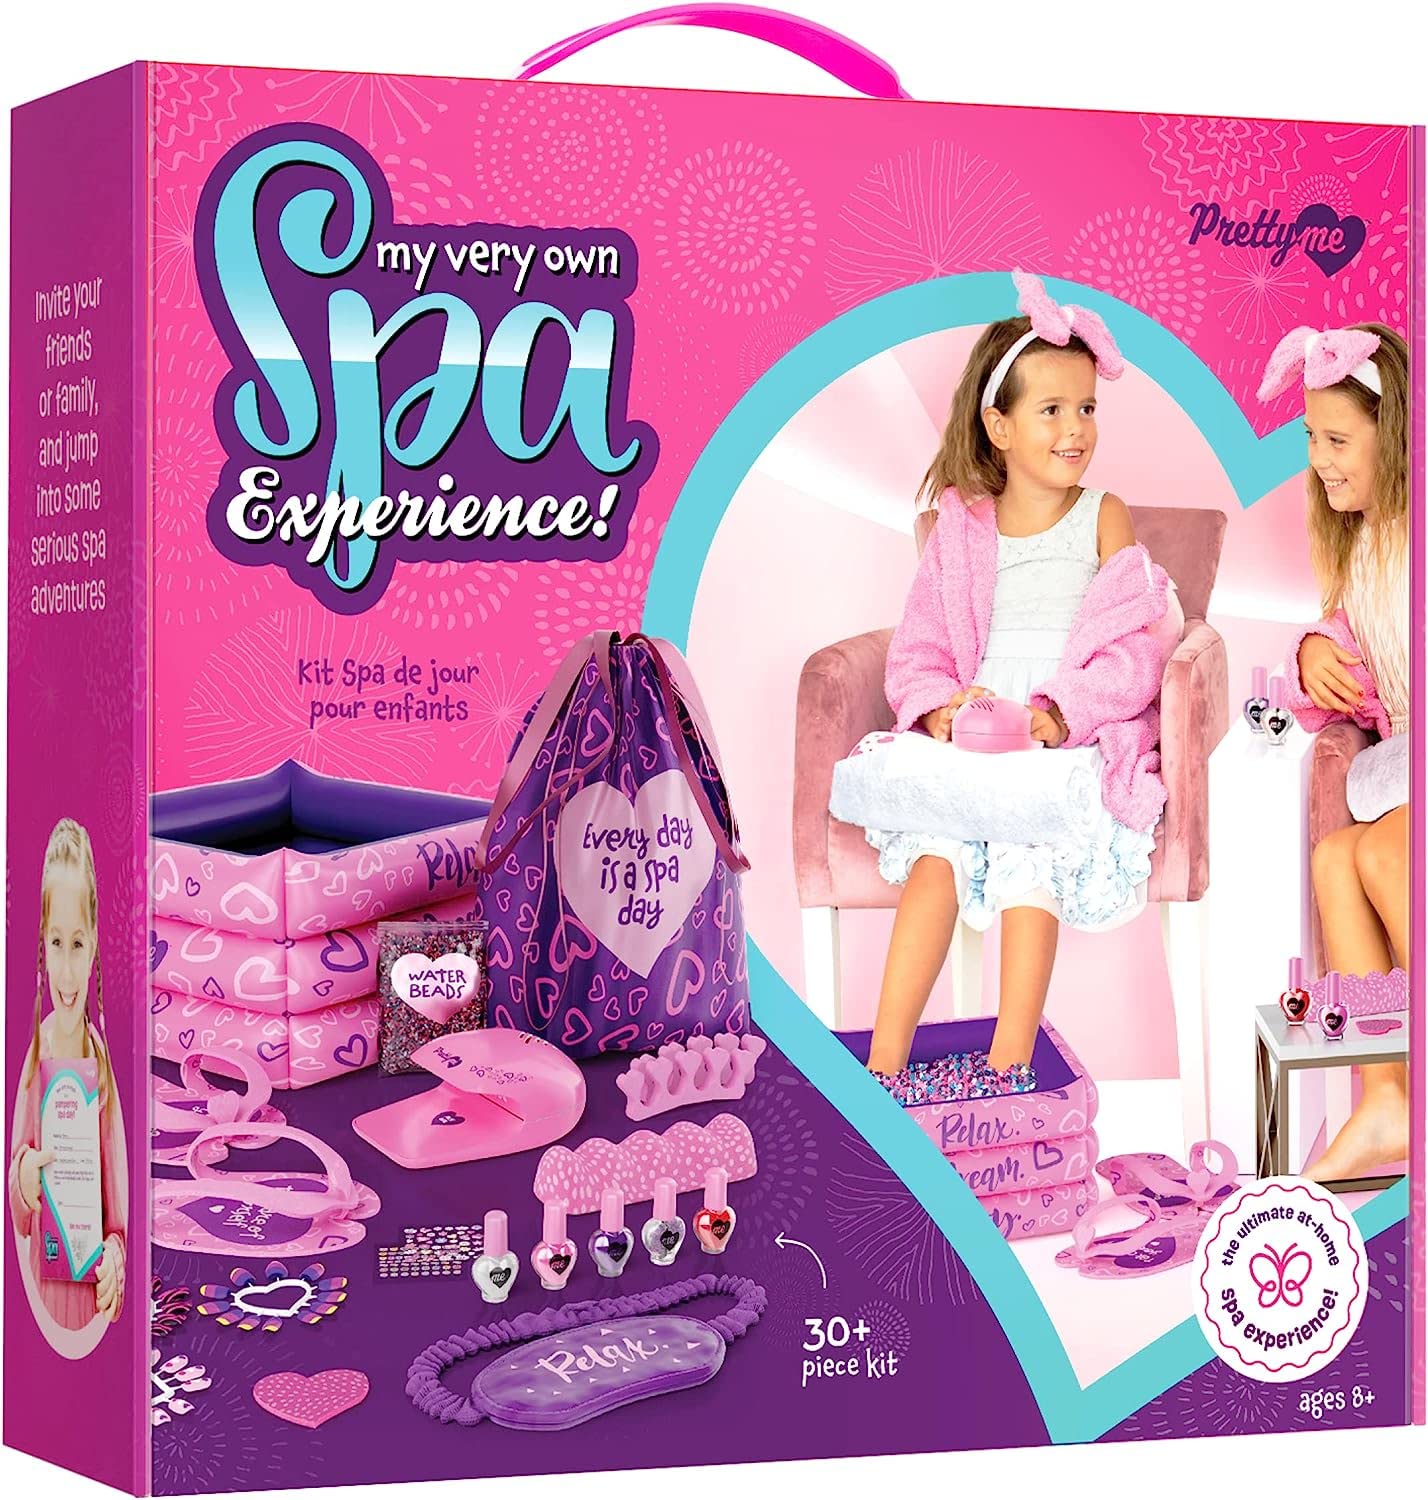 Spa Day Gift Set for Girls - Kids Manicure Pedicure Kit for Ages 6, 7, 8,  9, 10-12 Year Old Girl Gifts - Nail Art Salon + Sensory Beads Foot Spa +  Accessories Kit - Self Care Toys Age 5-12